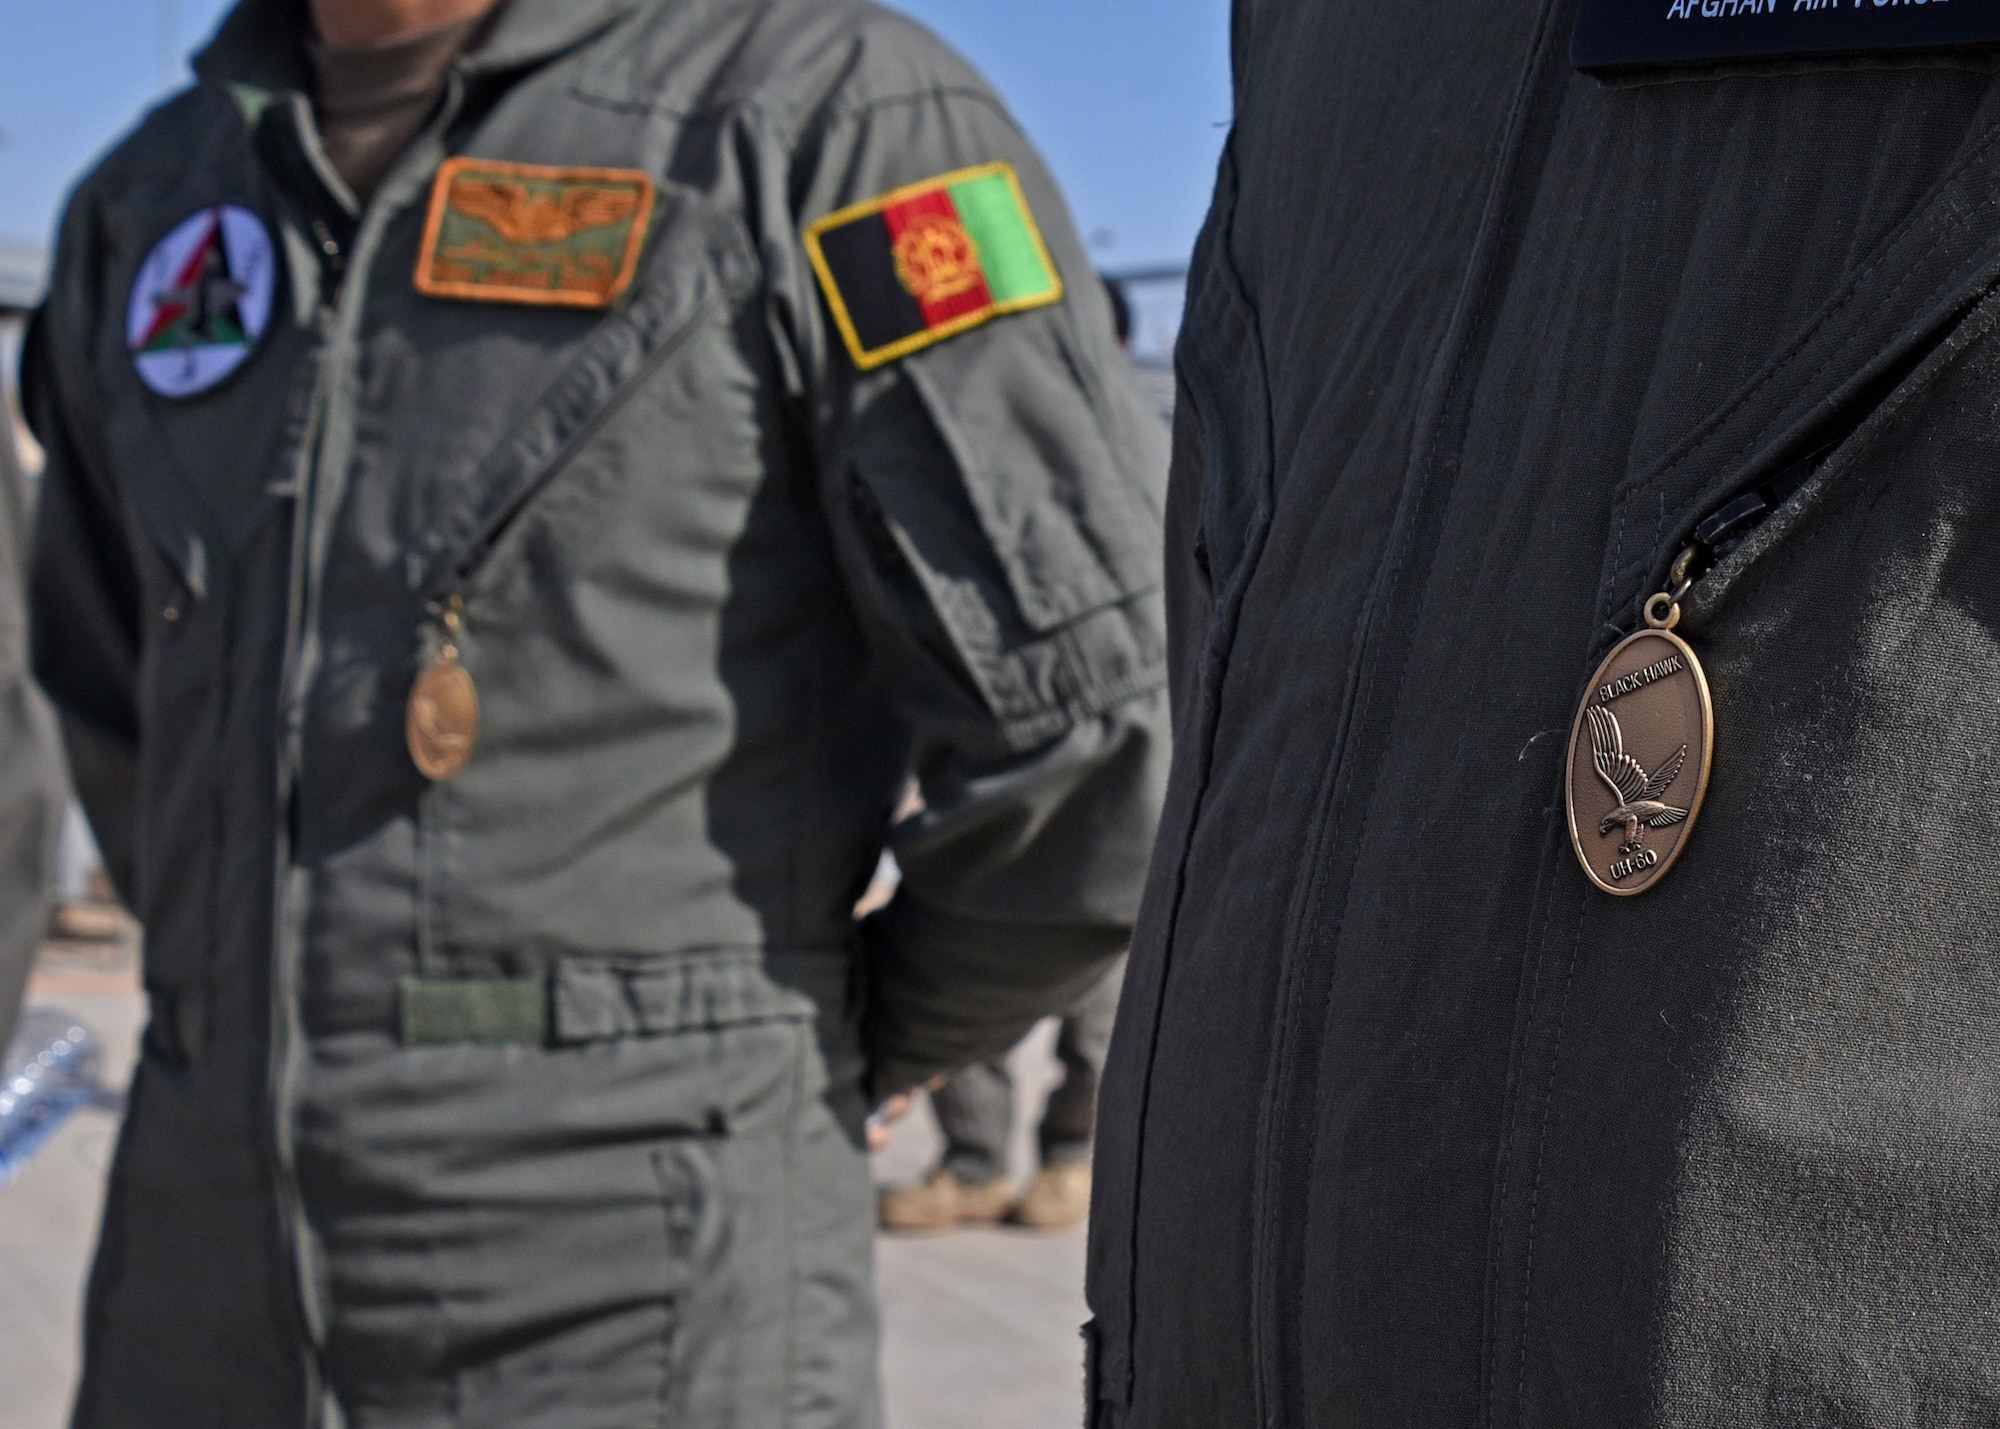 Afghan Air Force pilots wear Black Hawk pendants given by instructors signifying their completion of UH-60 Black Hawk training at Kandahar Airfield, Afghanistan, Nov. 20, 2017. The pilots are the first six to become AAF UH-60 pilots. The pilots have prior experience in the Mi-17 Hip. The transition of airframe for the AAF pilots will provide firepower and mobility, significant offensive factors enabling the Afghan National Defense and Security Forces to break the stalemate with insurgents. (U.S. Air Force photo by Tech. Sgt. Veronica Pierce)